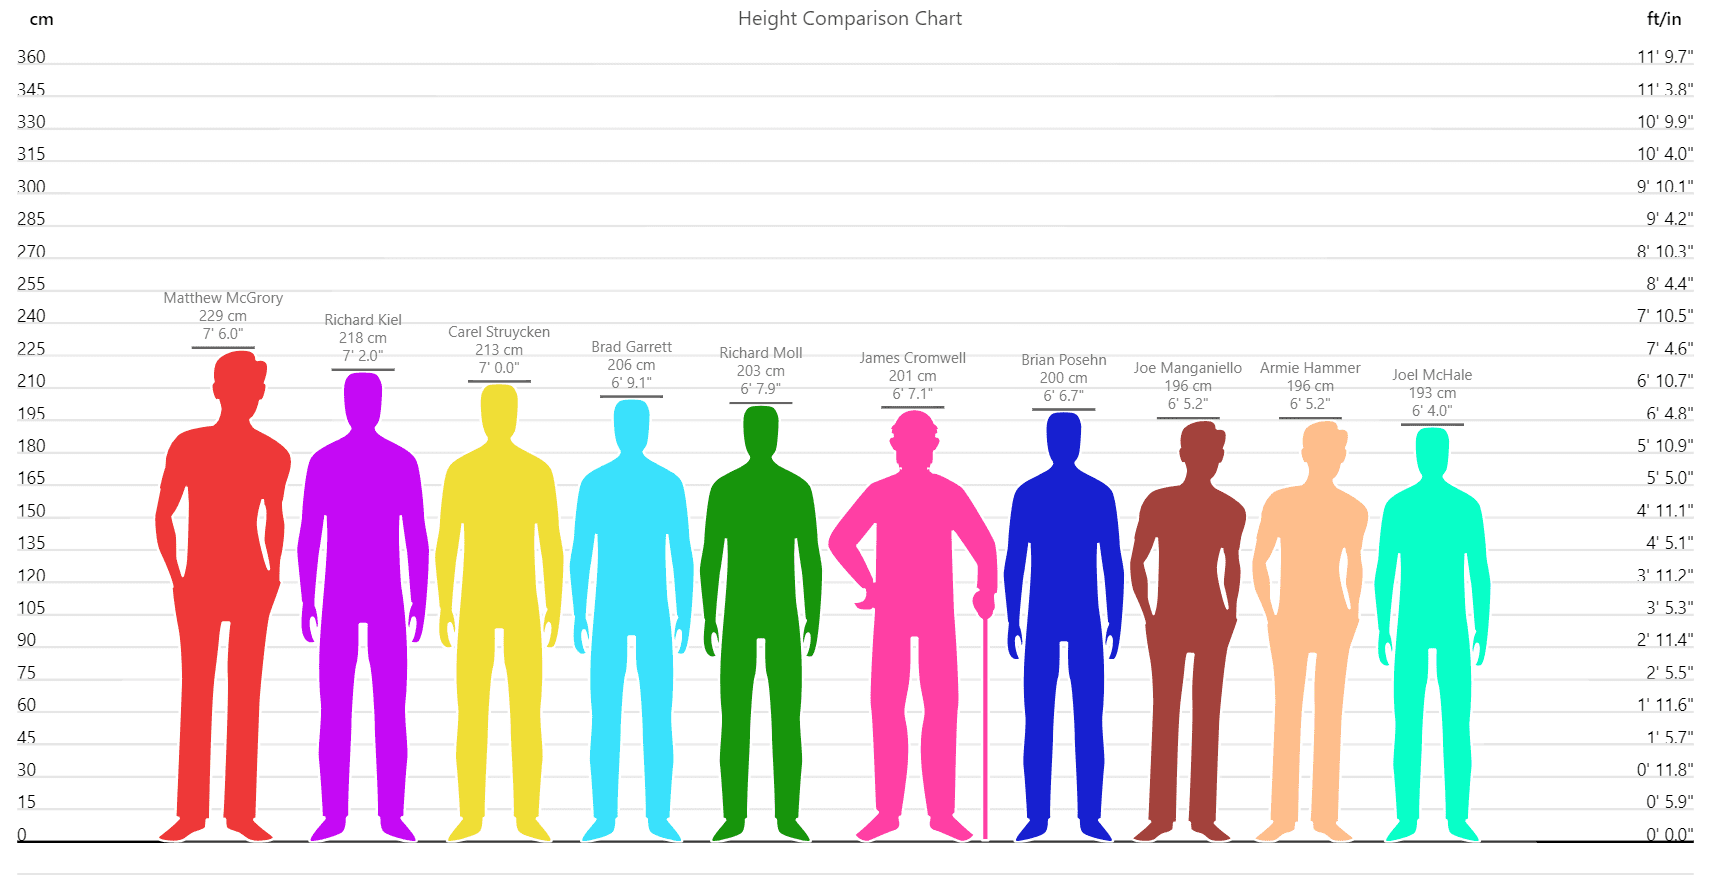 Top 10 Tallest Hollywood Actors – Height Comparison Chart